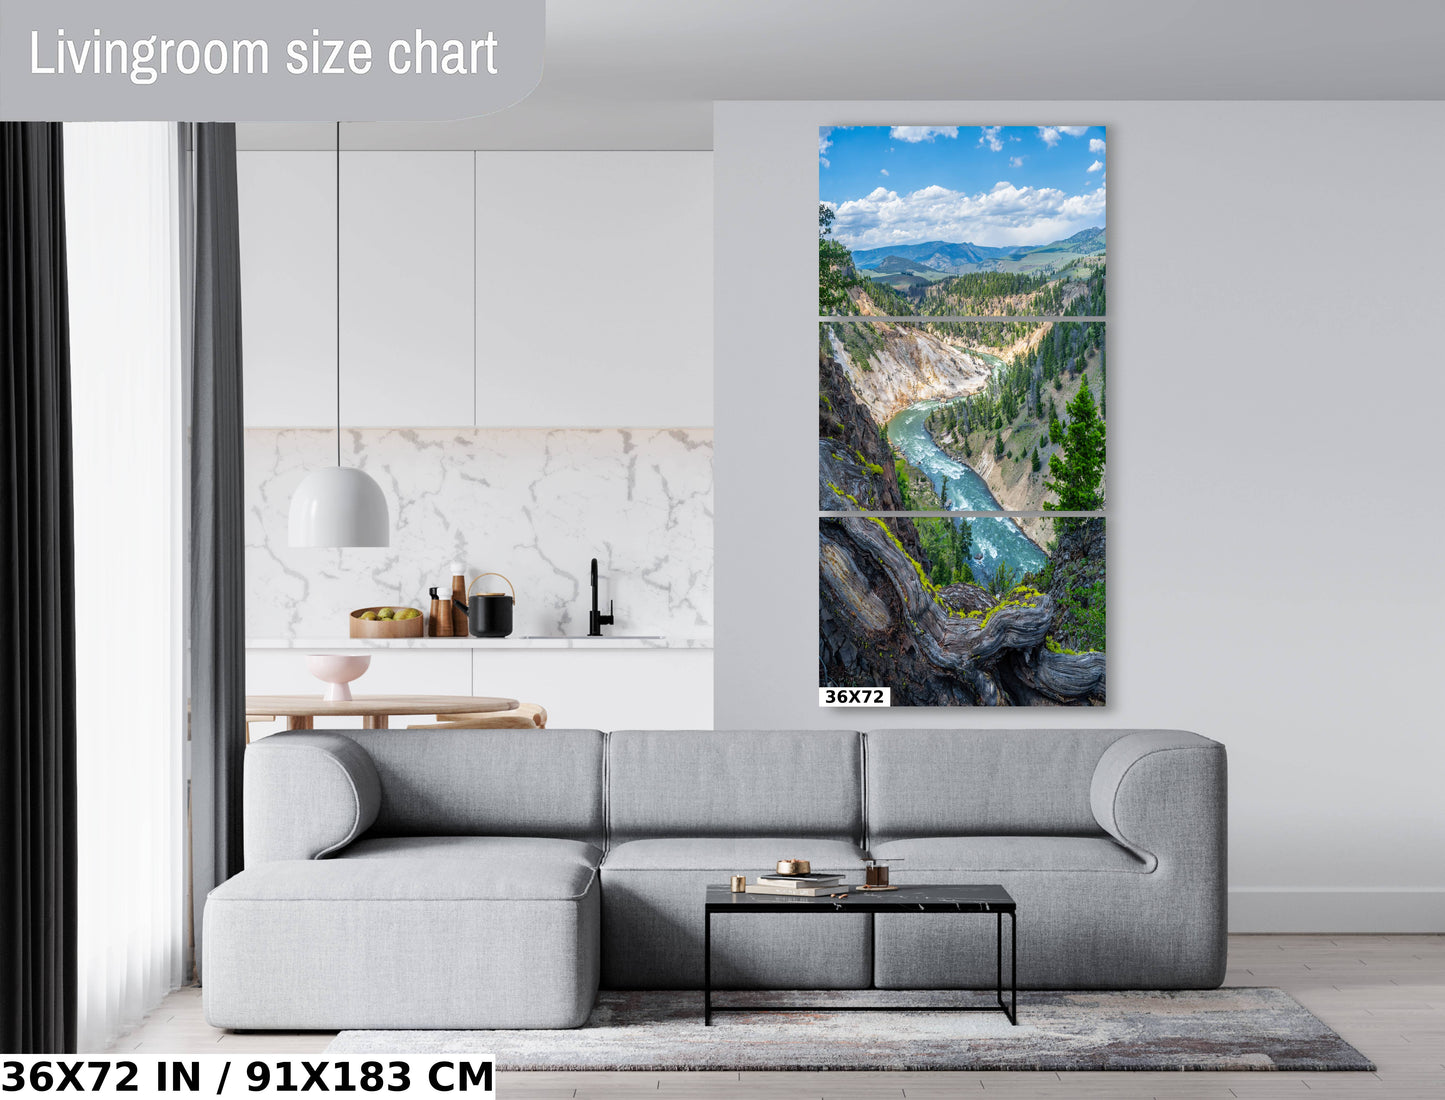 Sculpted by Time: Artist Point Grand Cayon Yellowstone River Wall Art Metal Acrylic Print Wyoming Poster Waterfall Photography